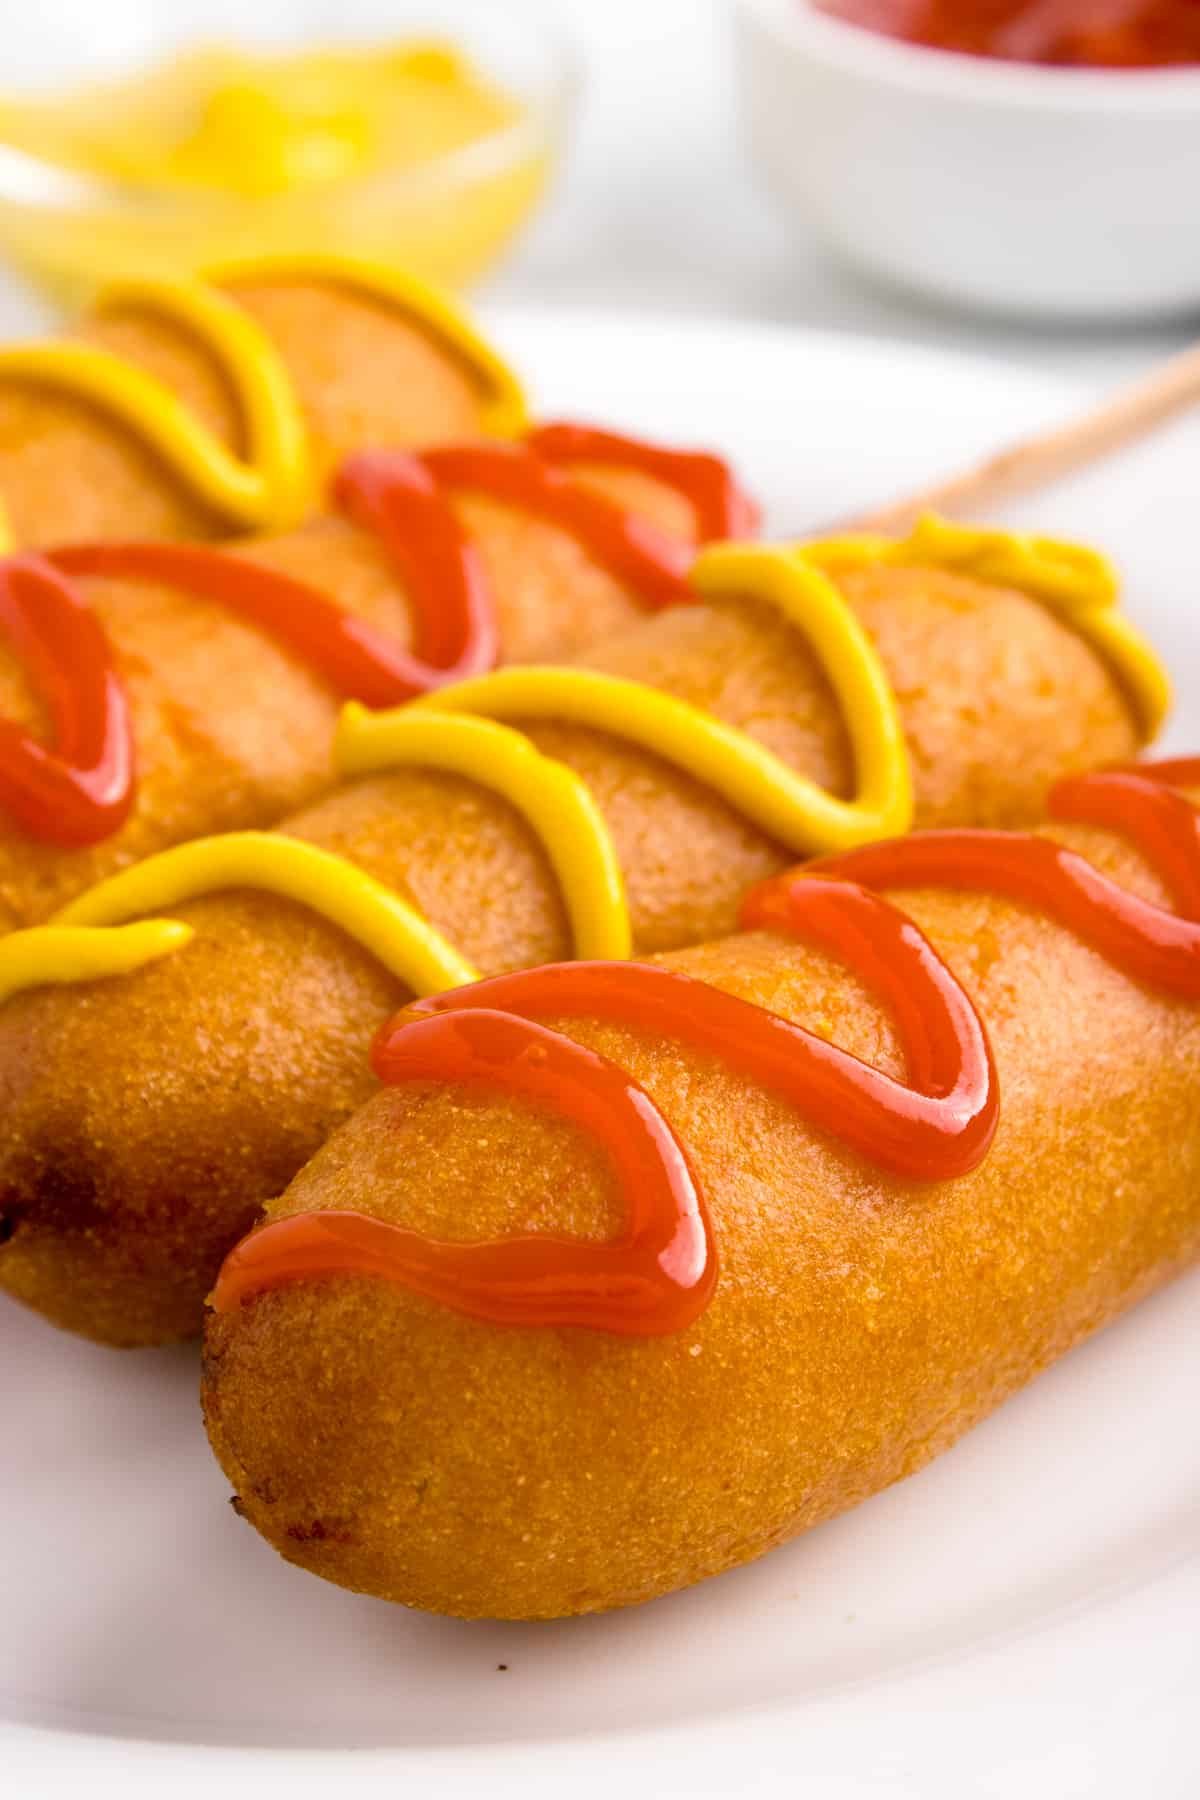 A plate of corn dogs with ketchup and mustard.